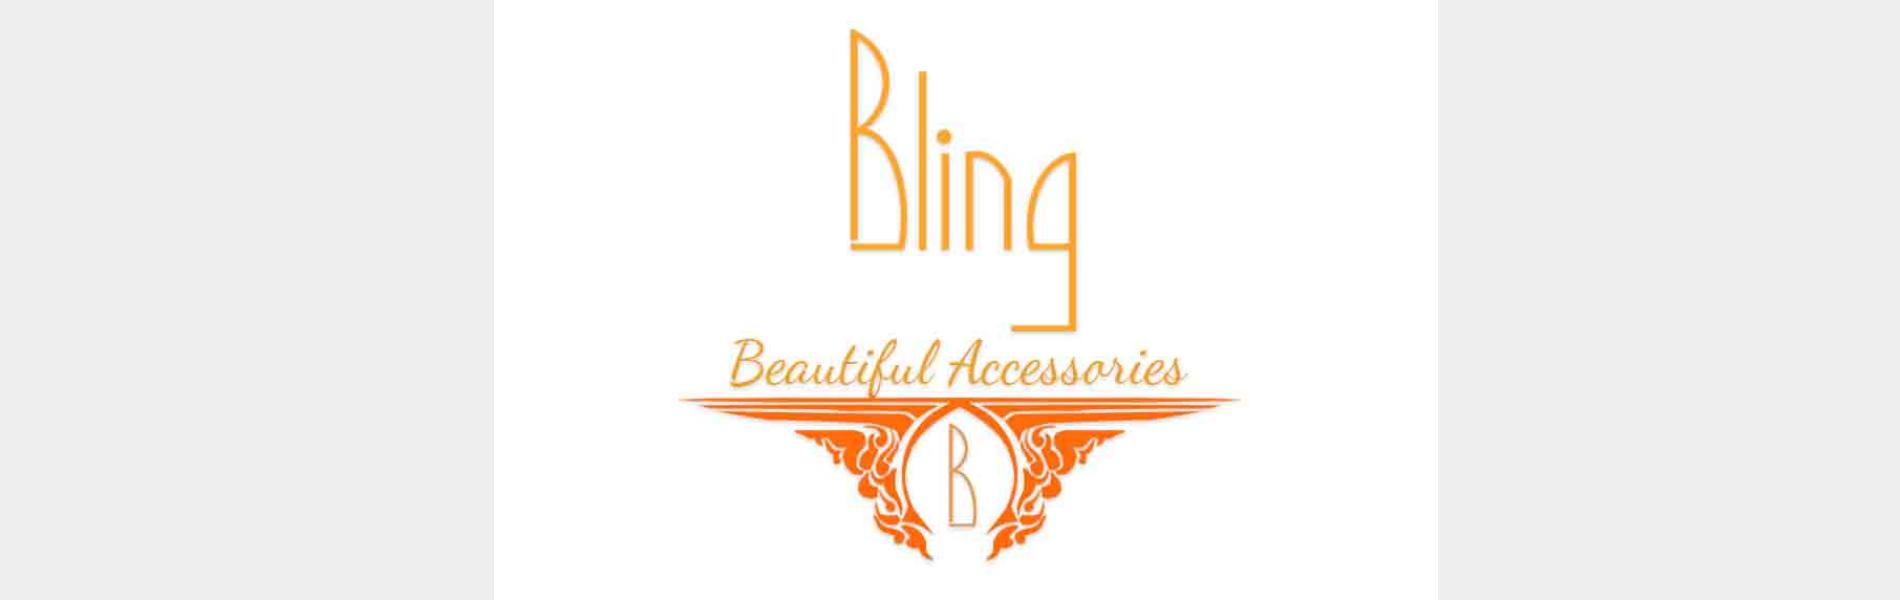 Bling Beautiful Accessories